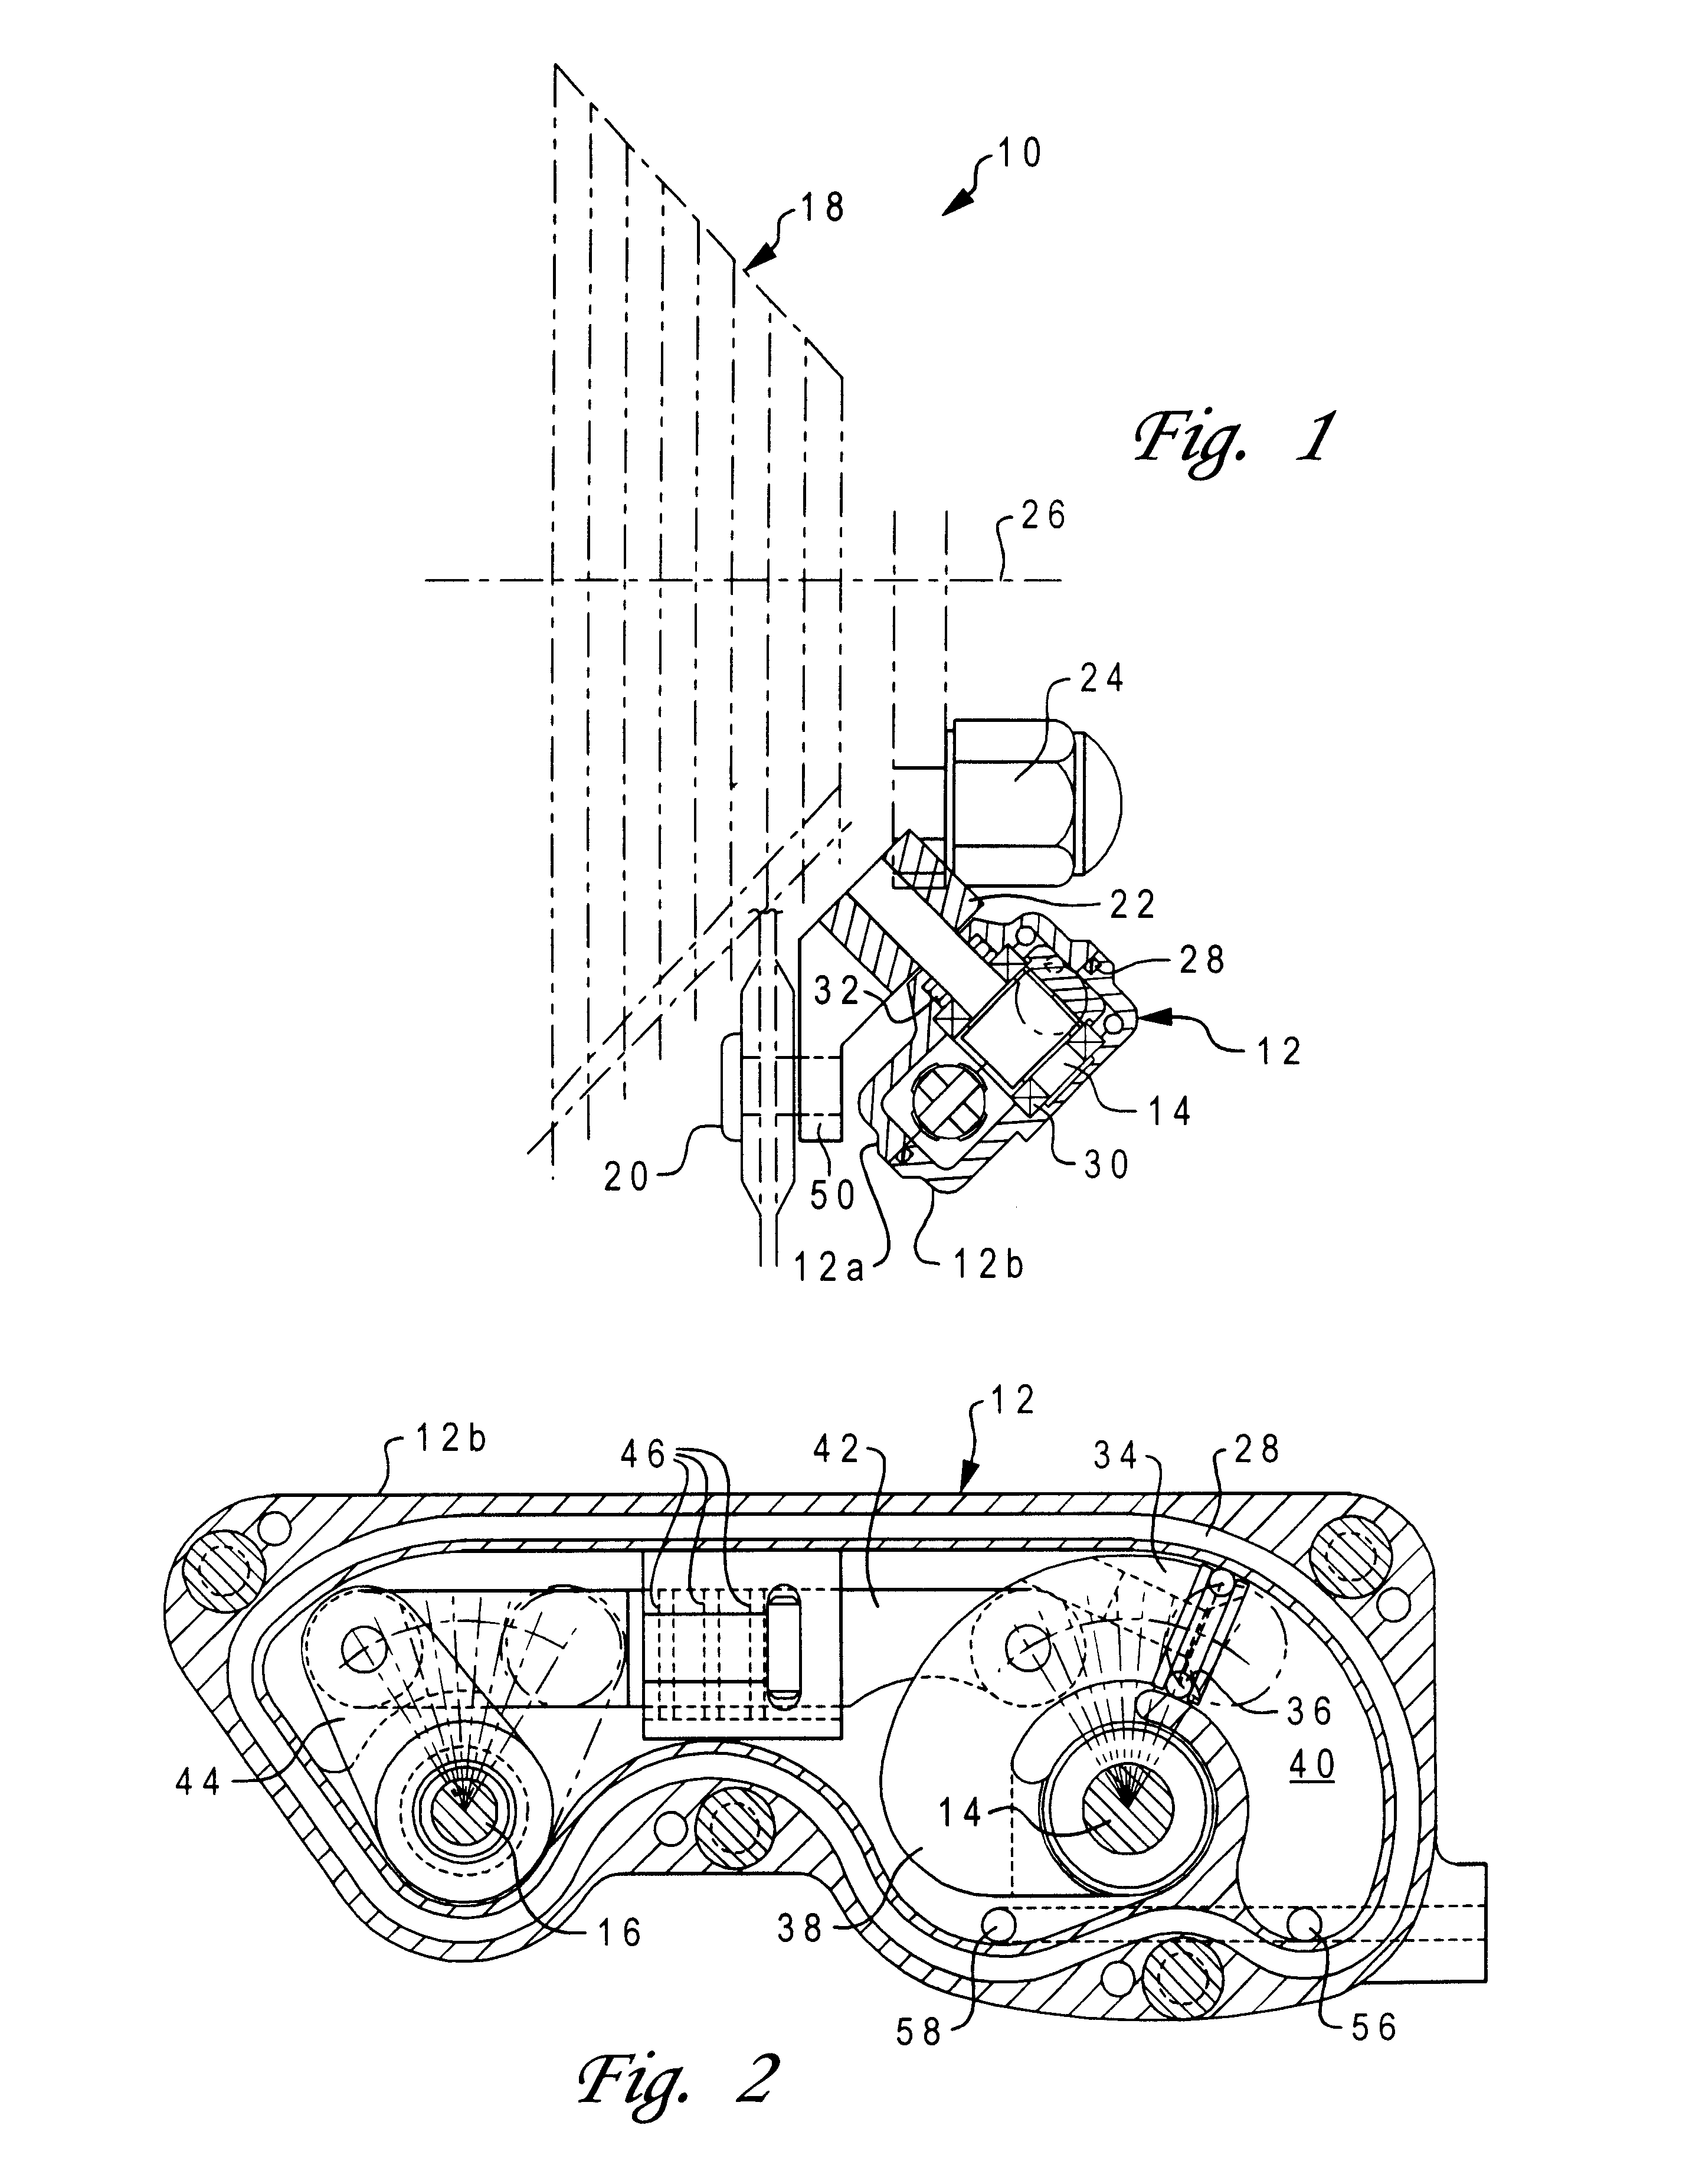 Compact hydraulically-operated derailleur shifting system for bicycles